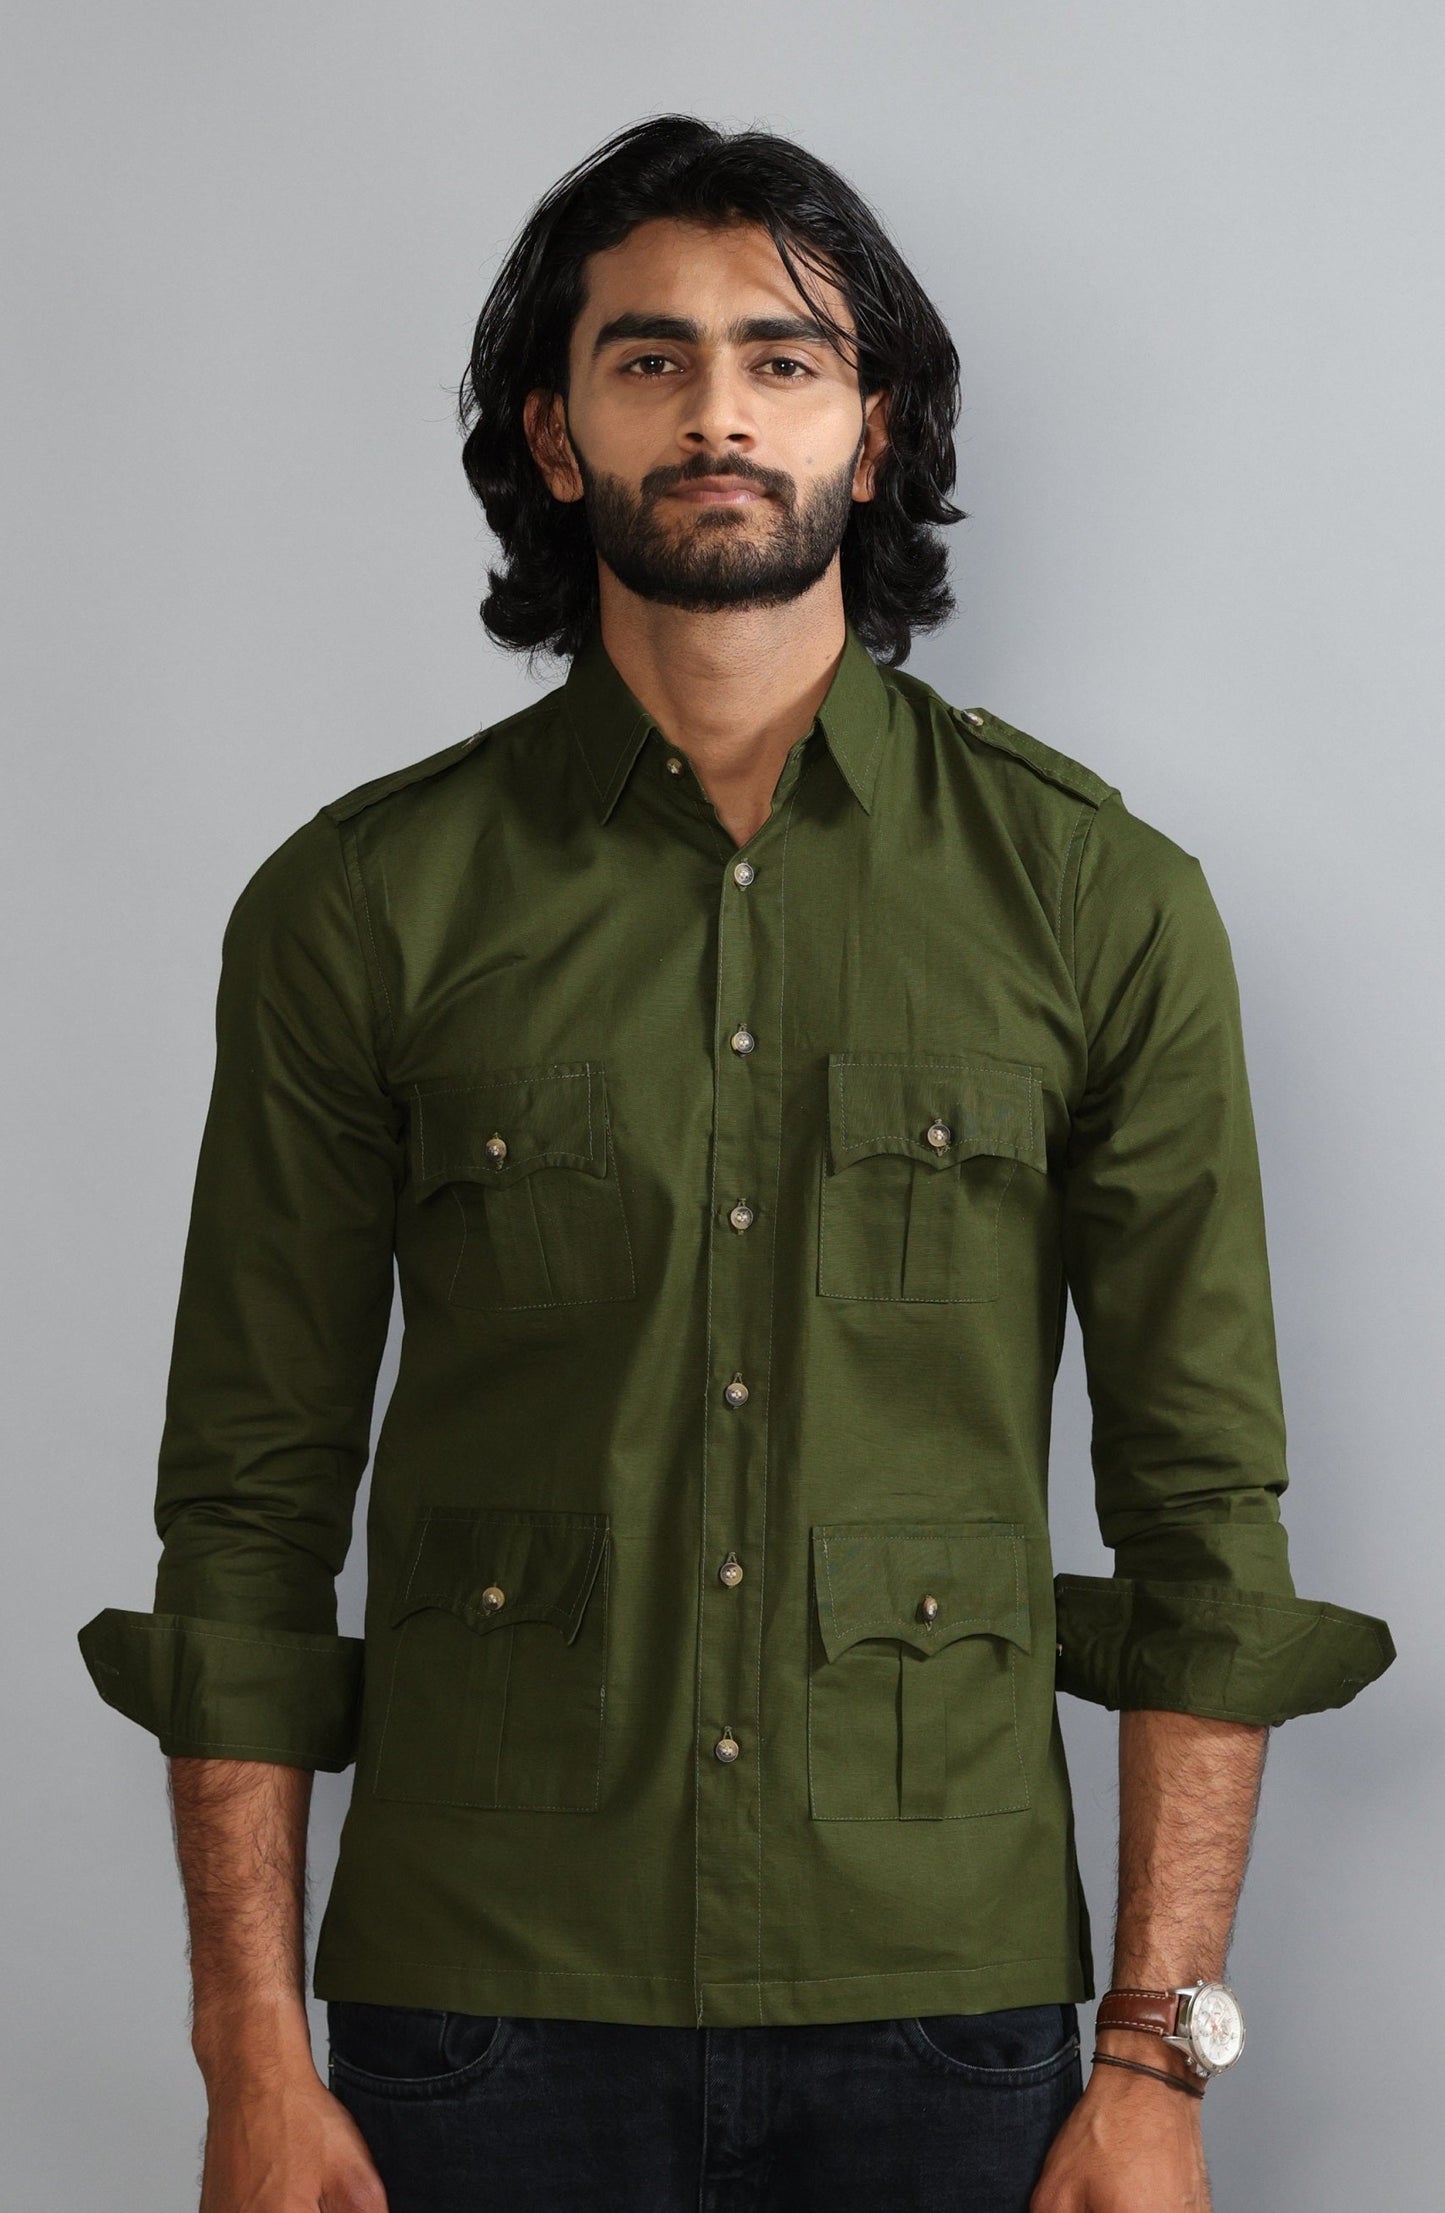 Battle Green Color Cotton Hunting Shirt